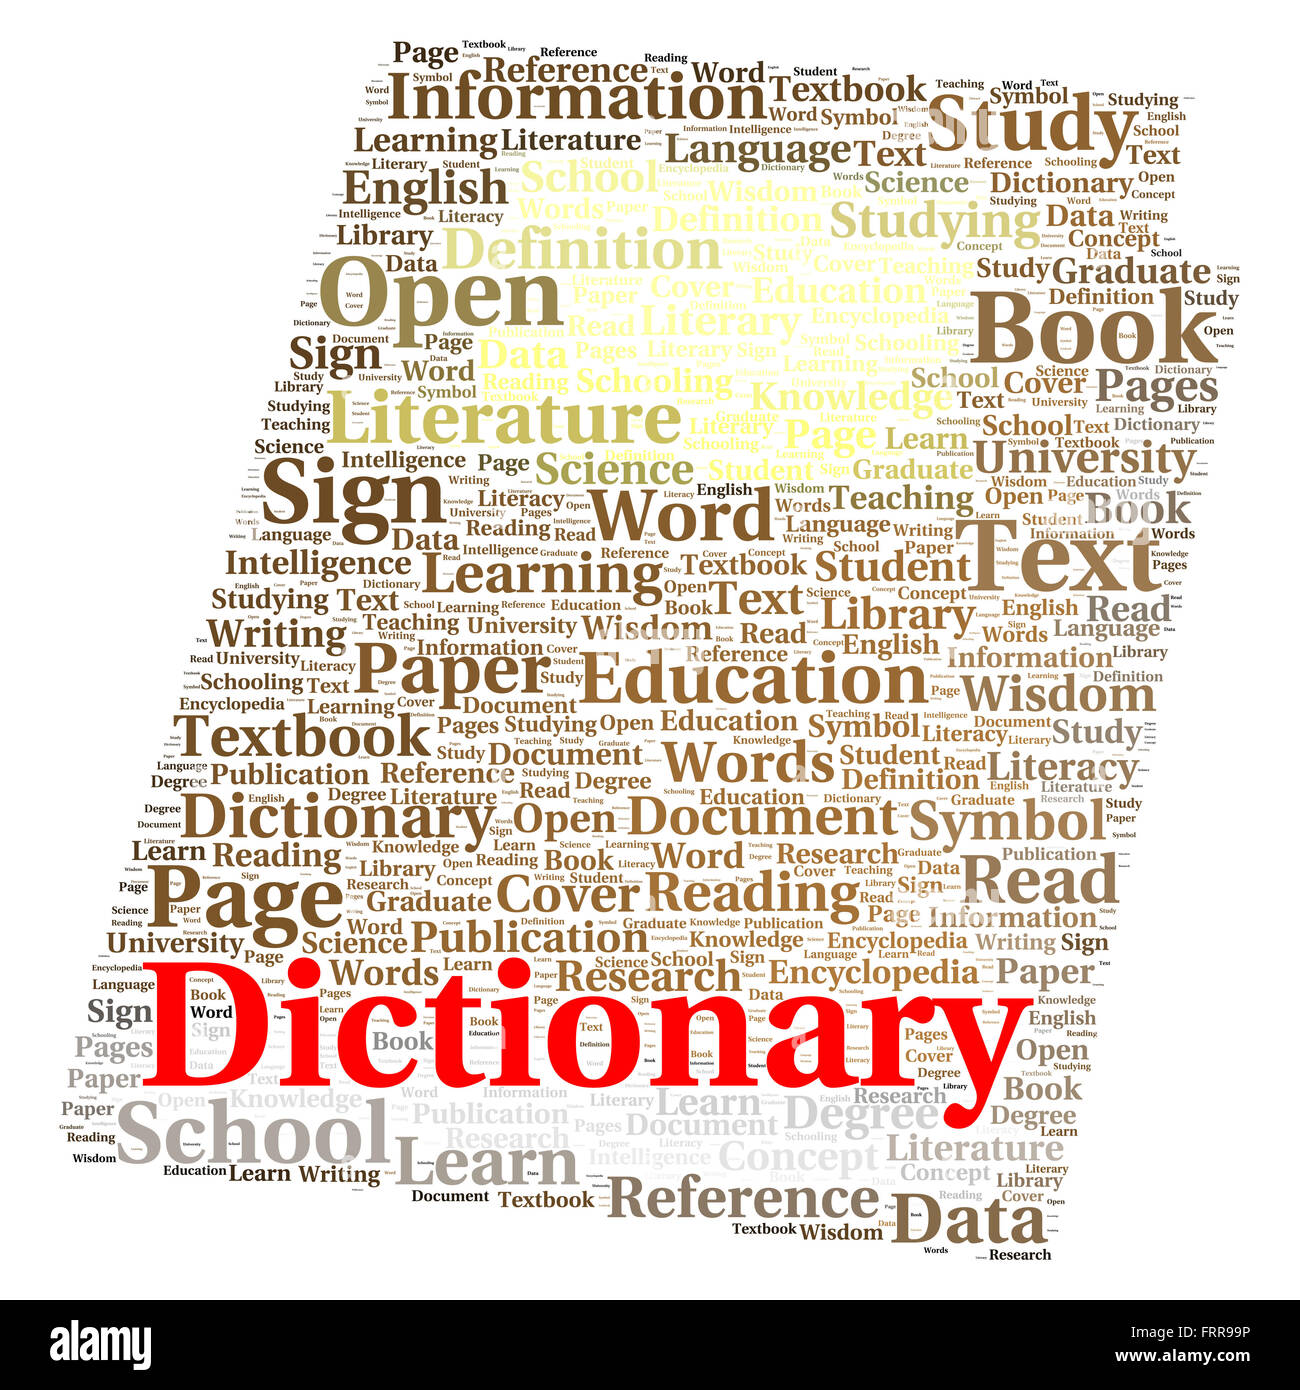 Ditto Word Dictionary Ditto Concept Stock Photo 1078365620